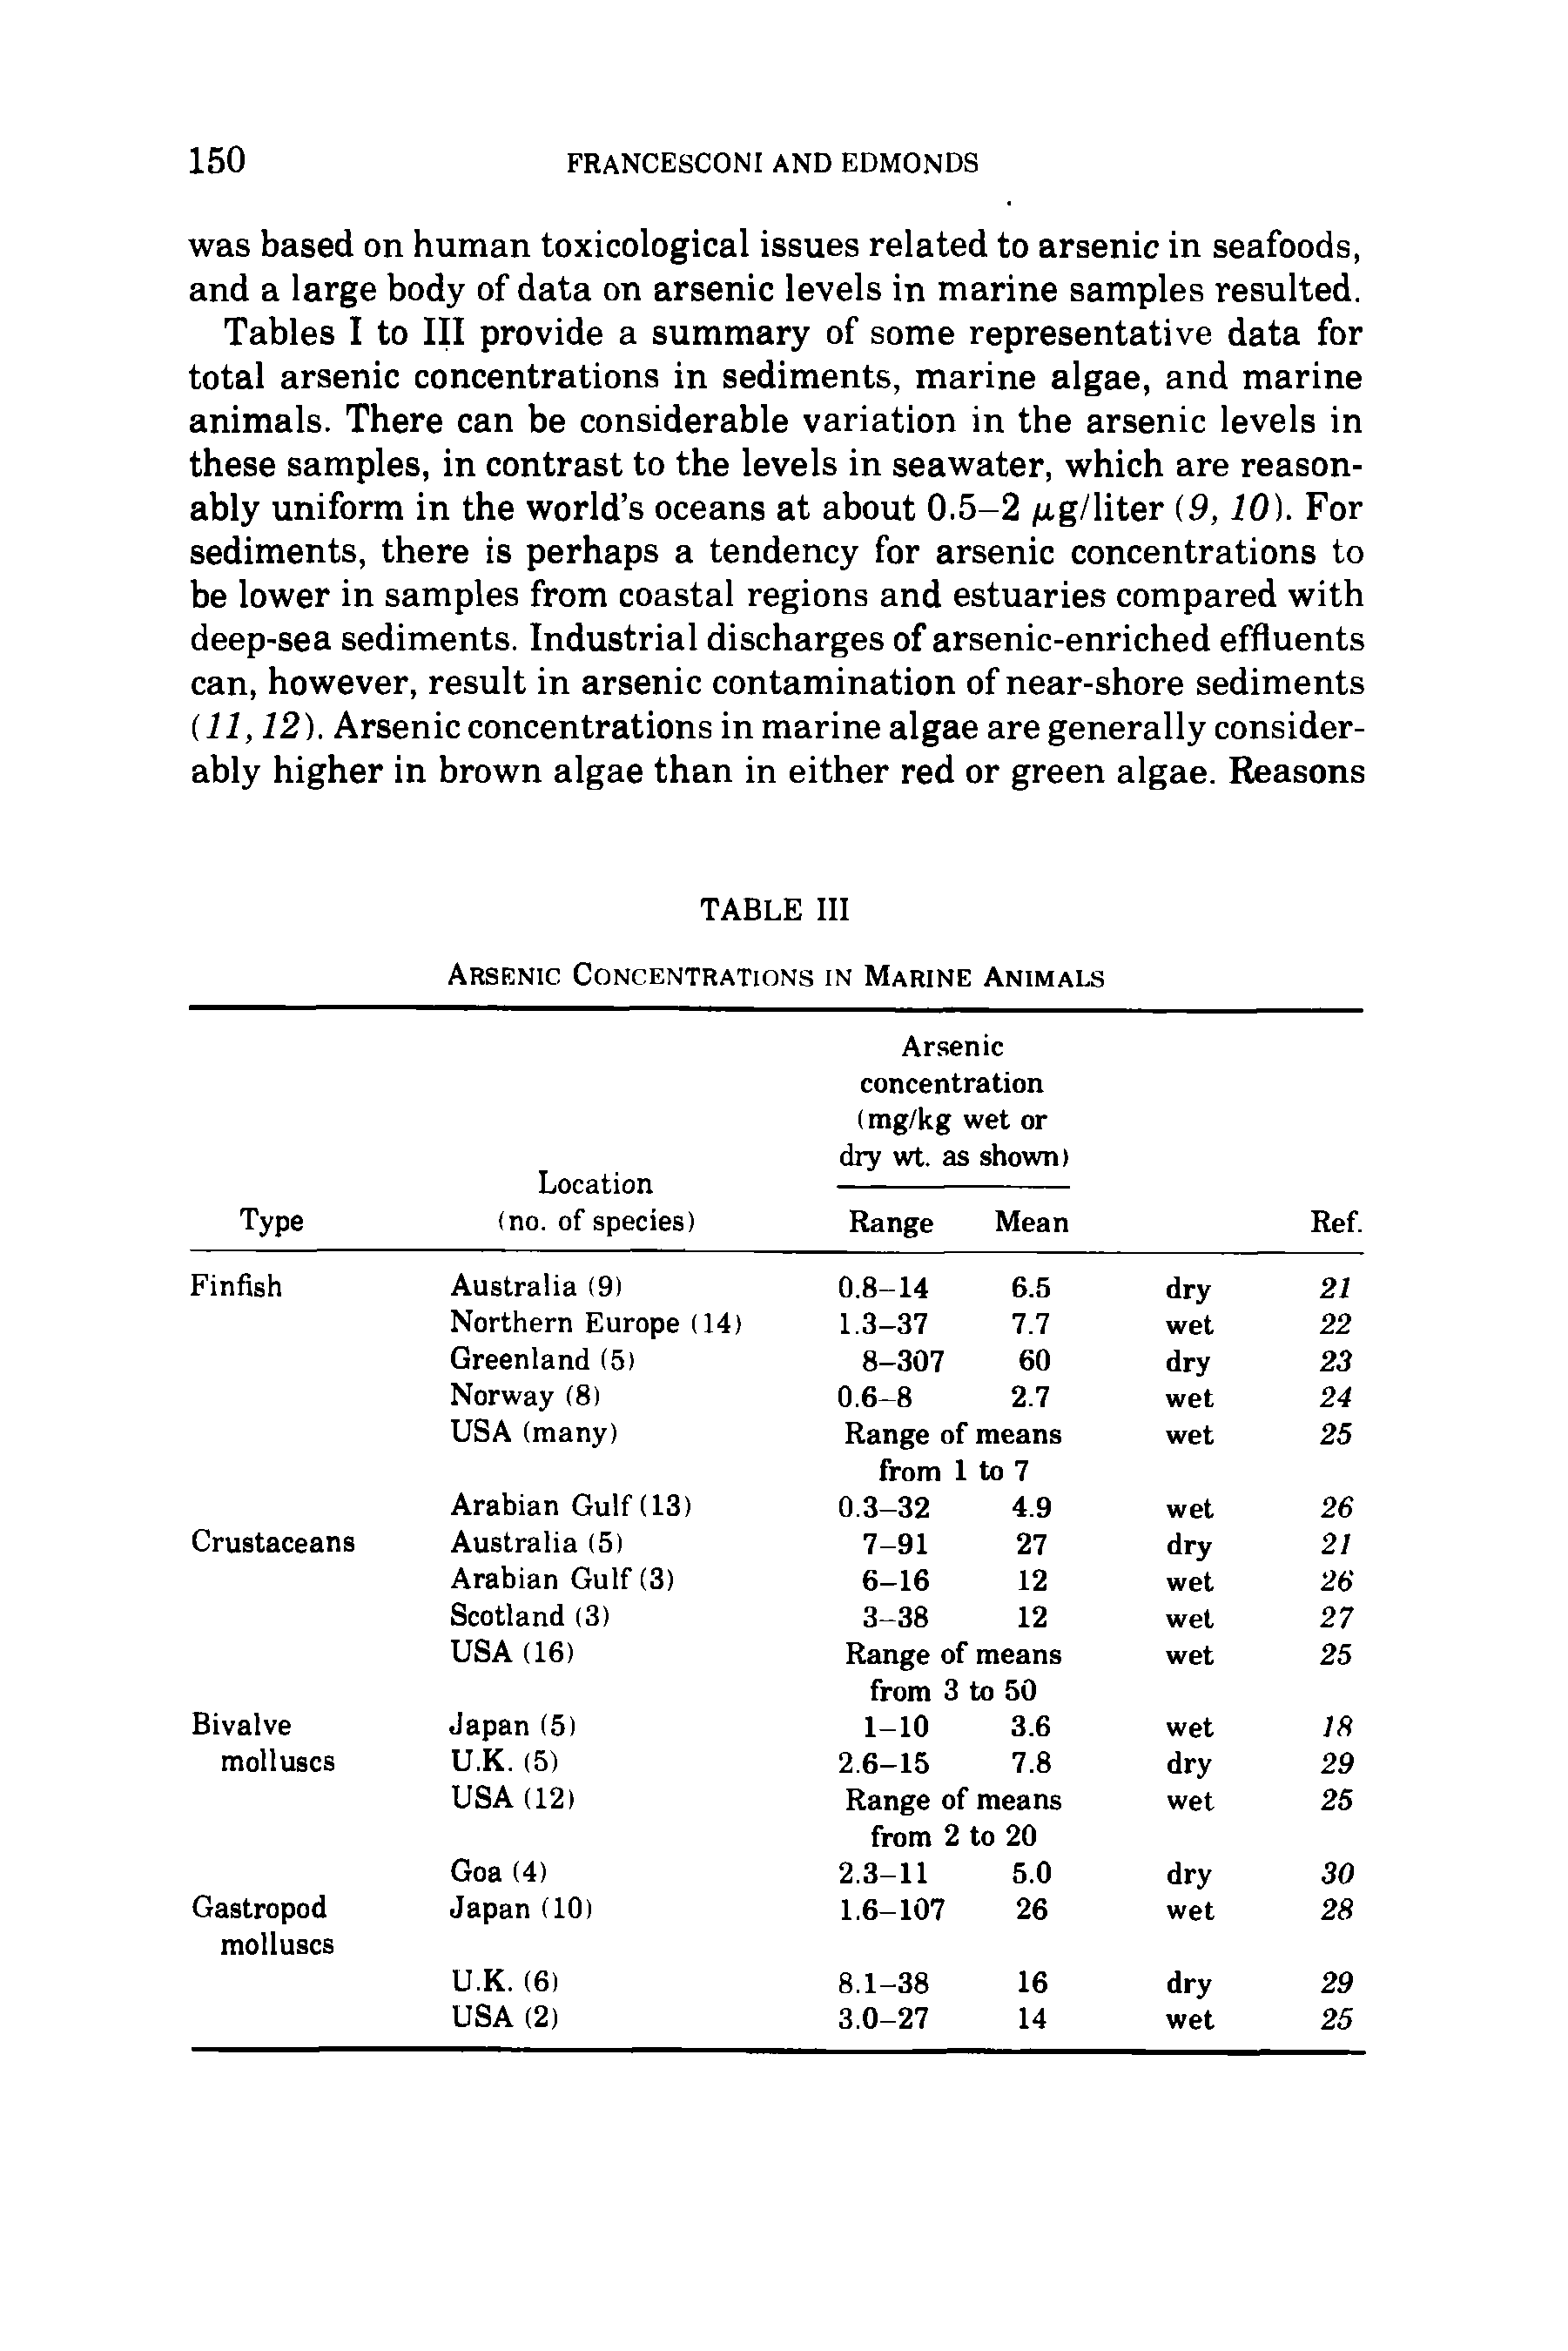 Tables I to III provide a summary of some representative data for total arsenic concentrations in sediments, marine algae, and marine animals. There can be considerable variation in the arsenic levels in these samples, in contrast to the levels in seawater, which are reasonably uniform in the world s oceans at about 0.5-2 p.g/liter (9,10). For sediments, there is perhaps a tendency for arsenic concentrations to be lower in samples from coastal regions and estuaries compared with deep-sea sediments. Industrial discharges of arsenic-enriched effluents can, however, result in arsenic contamination of near-shore sediments (11,12). Arsenic concentrations in marine algae are generally considerably higher in brown algae than in either red or green algae. Reasons...